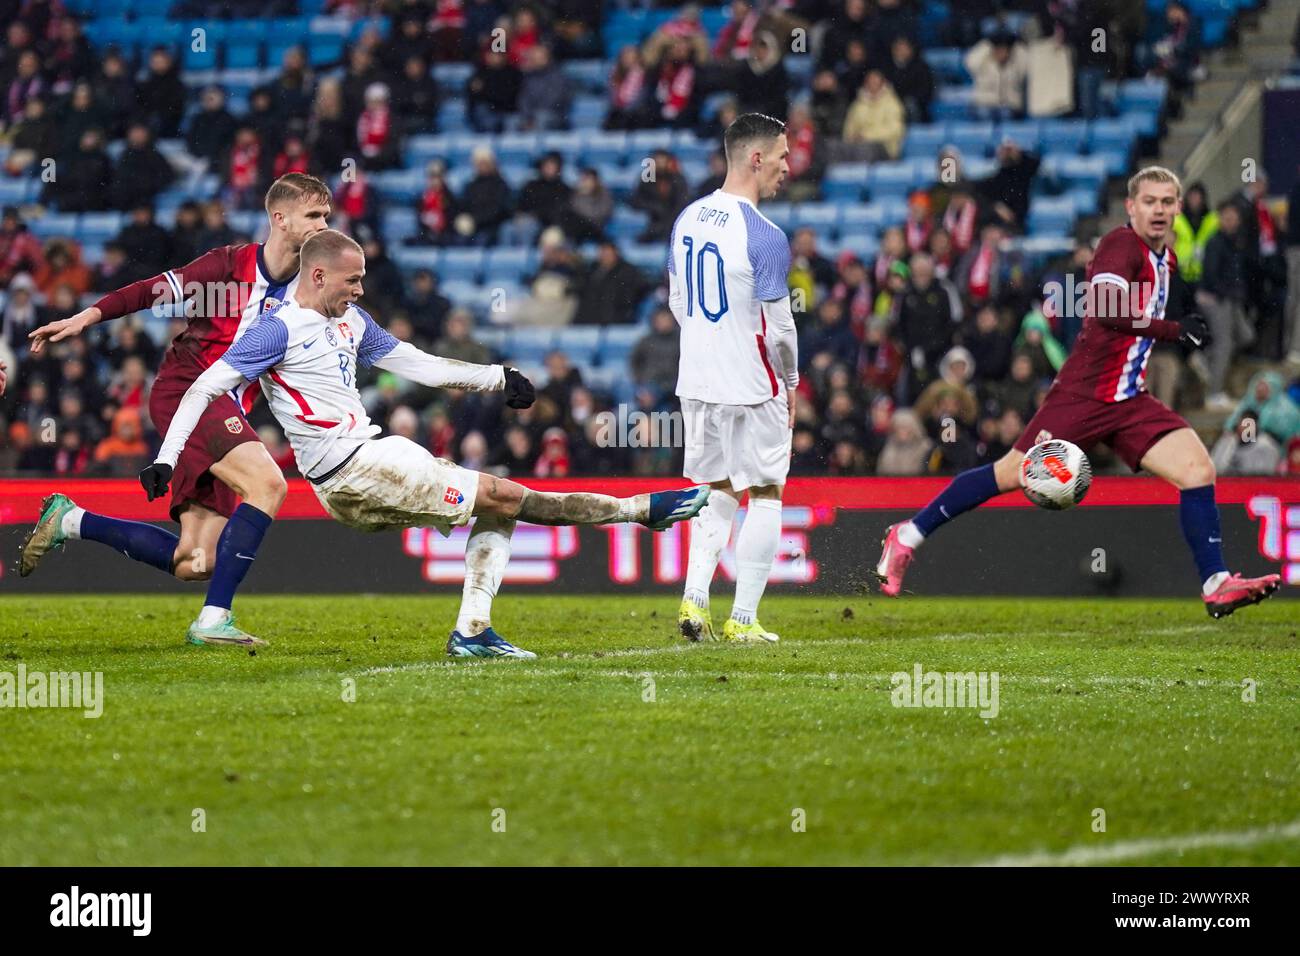 Oslo 20240326.Slovakia's Ondrej Duda scores during the private international soccer match between Norway and Slovakia at Ullevaal Stadium. Photo: Fredrik Varfjell / NTB Stock Photo